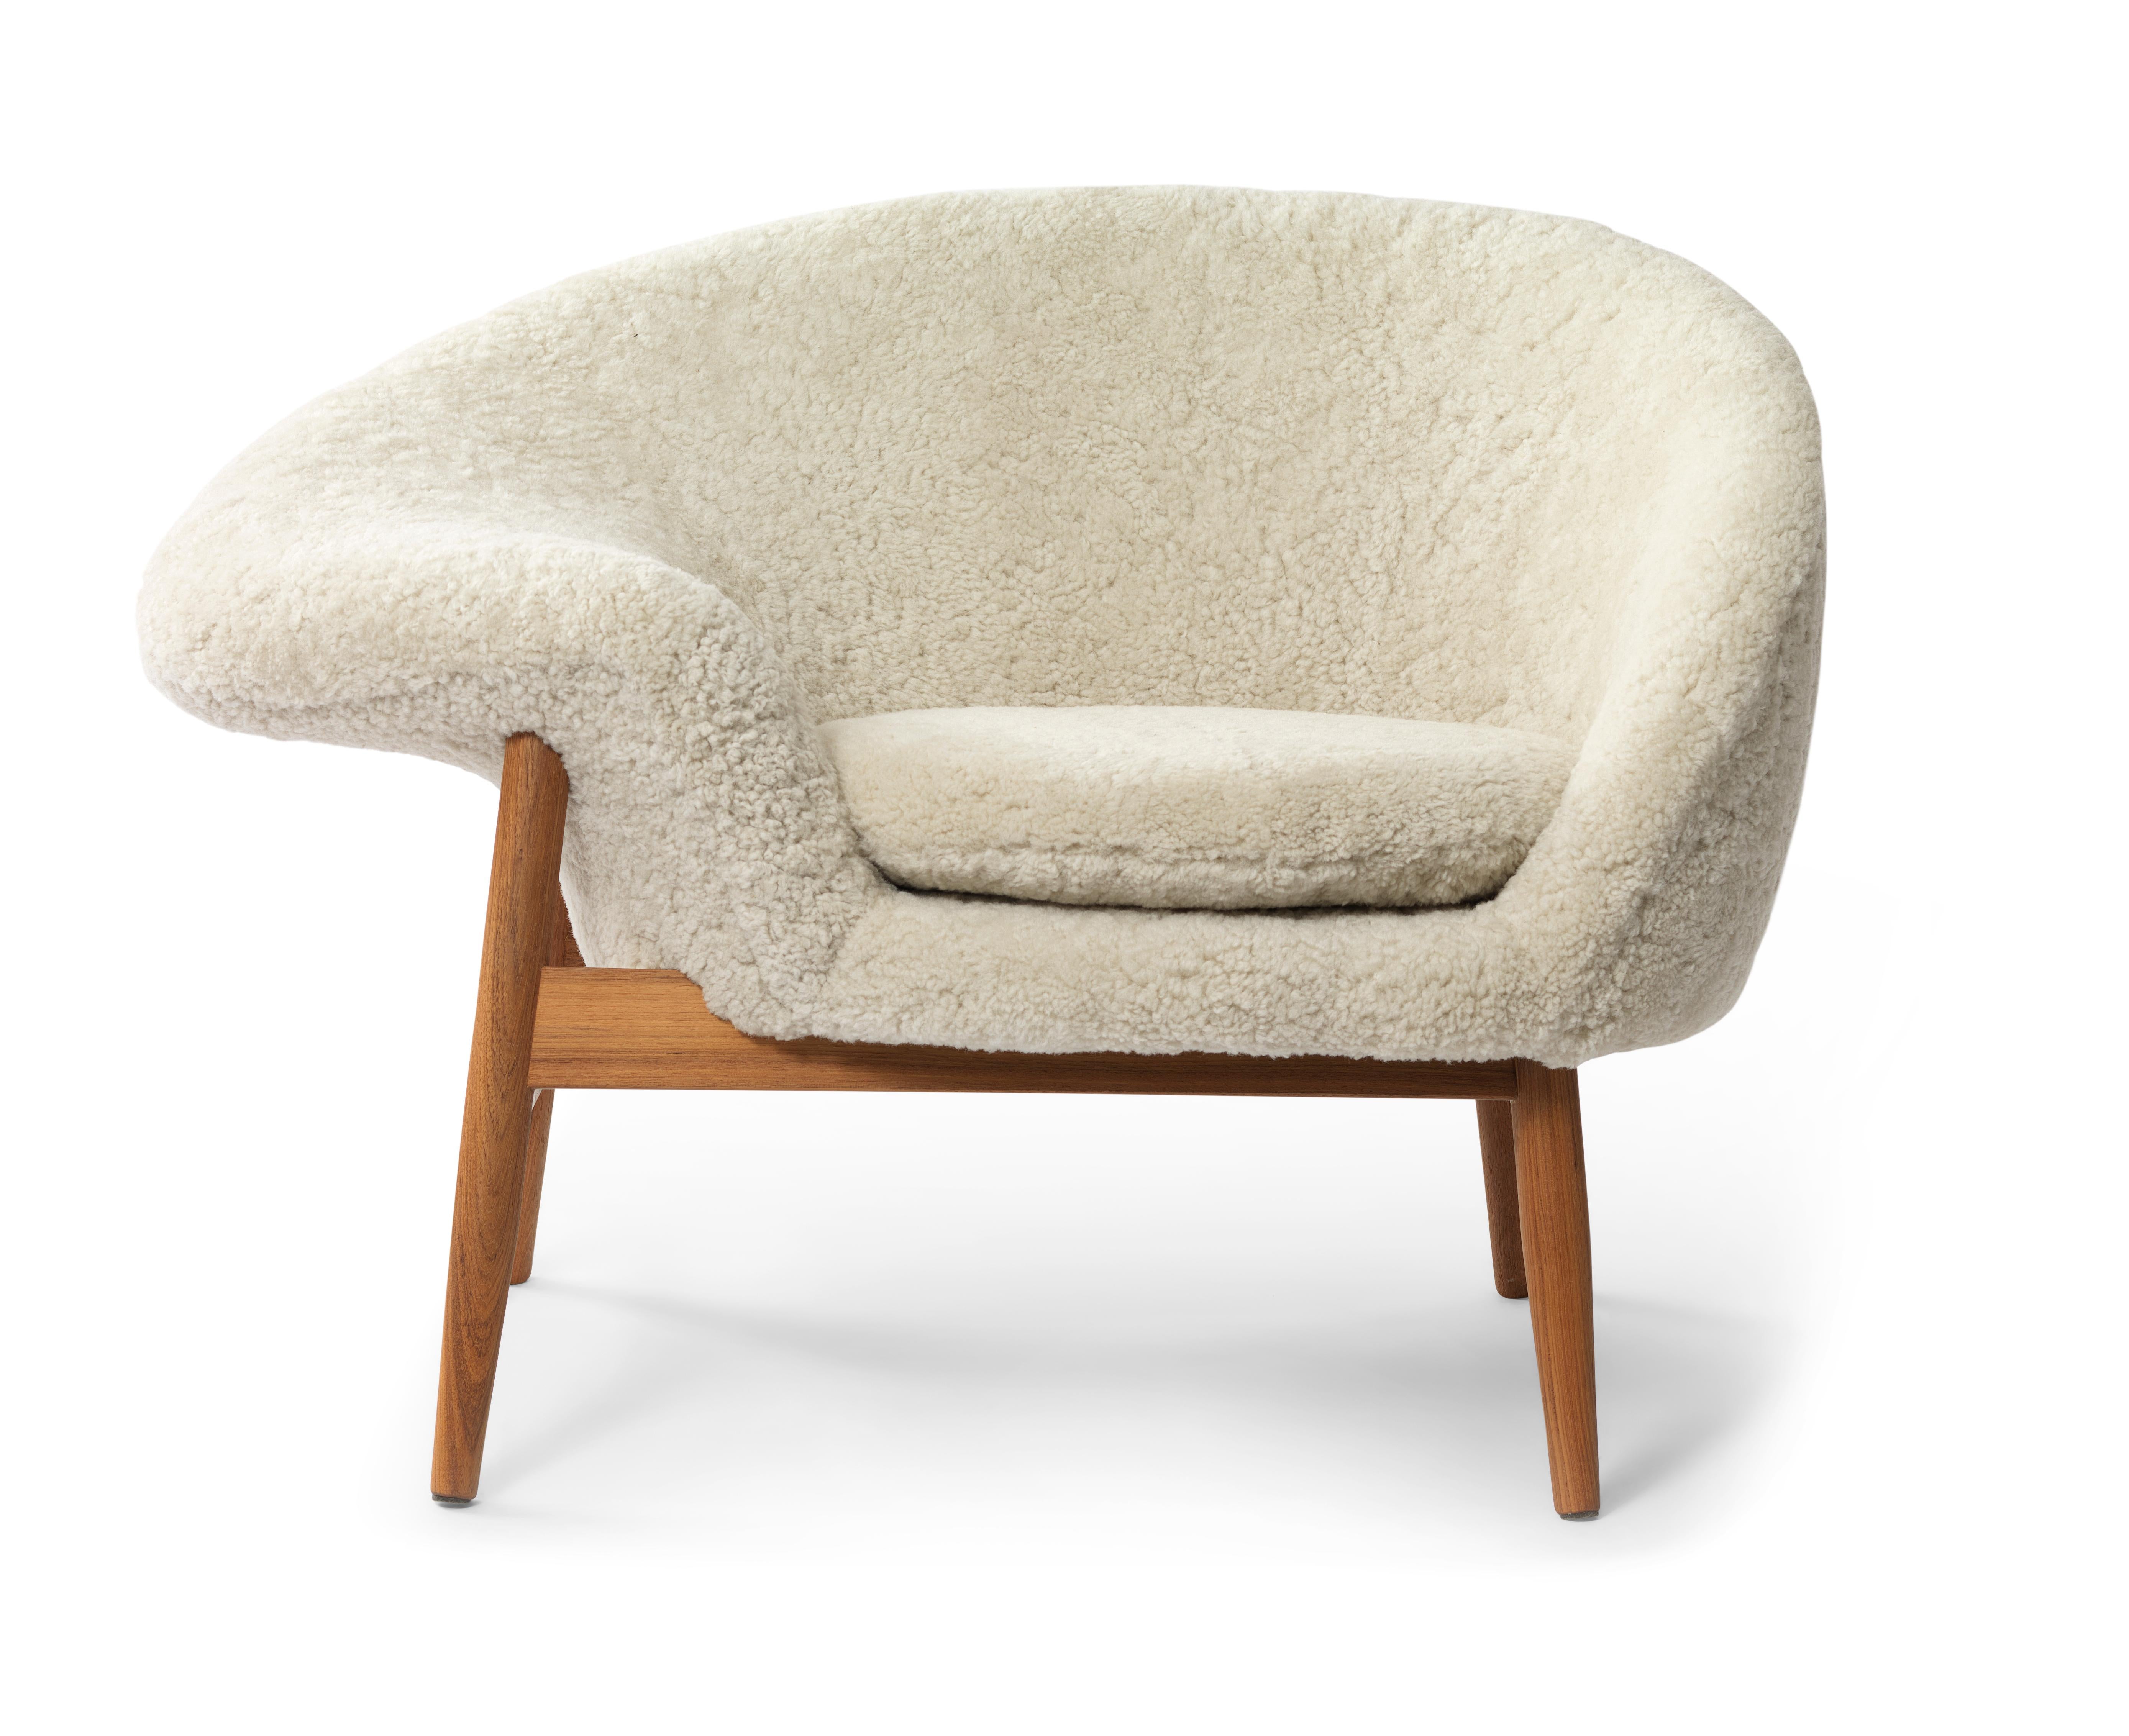 Fried egg left lounge chair nabuk oceano terra by Warm Nordic
Dimensions: D99 x W68 x H 68 cm
Material: sheepskin, textile or nubuck upholstery, solid oiled teak
Weight: 25 kg
Also available in different colours and finishes. 

A unique